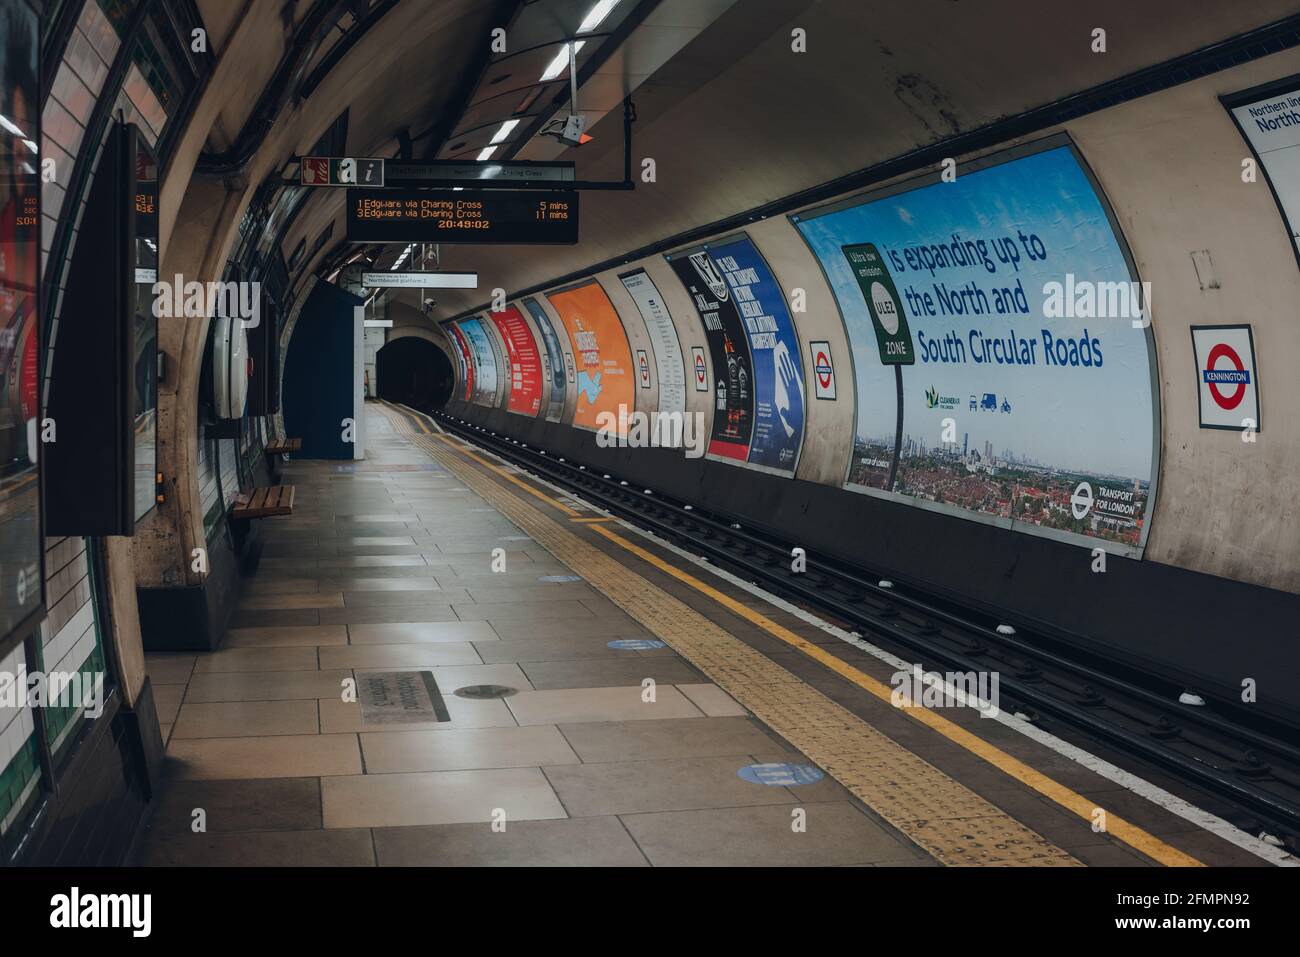 London, UK - May 09, 2021: View of the empty platform of Kennington stations of London Underground, the oldest underground railway in the world, selec Stock Photo